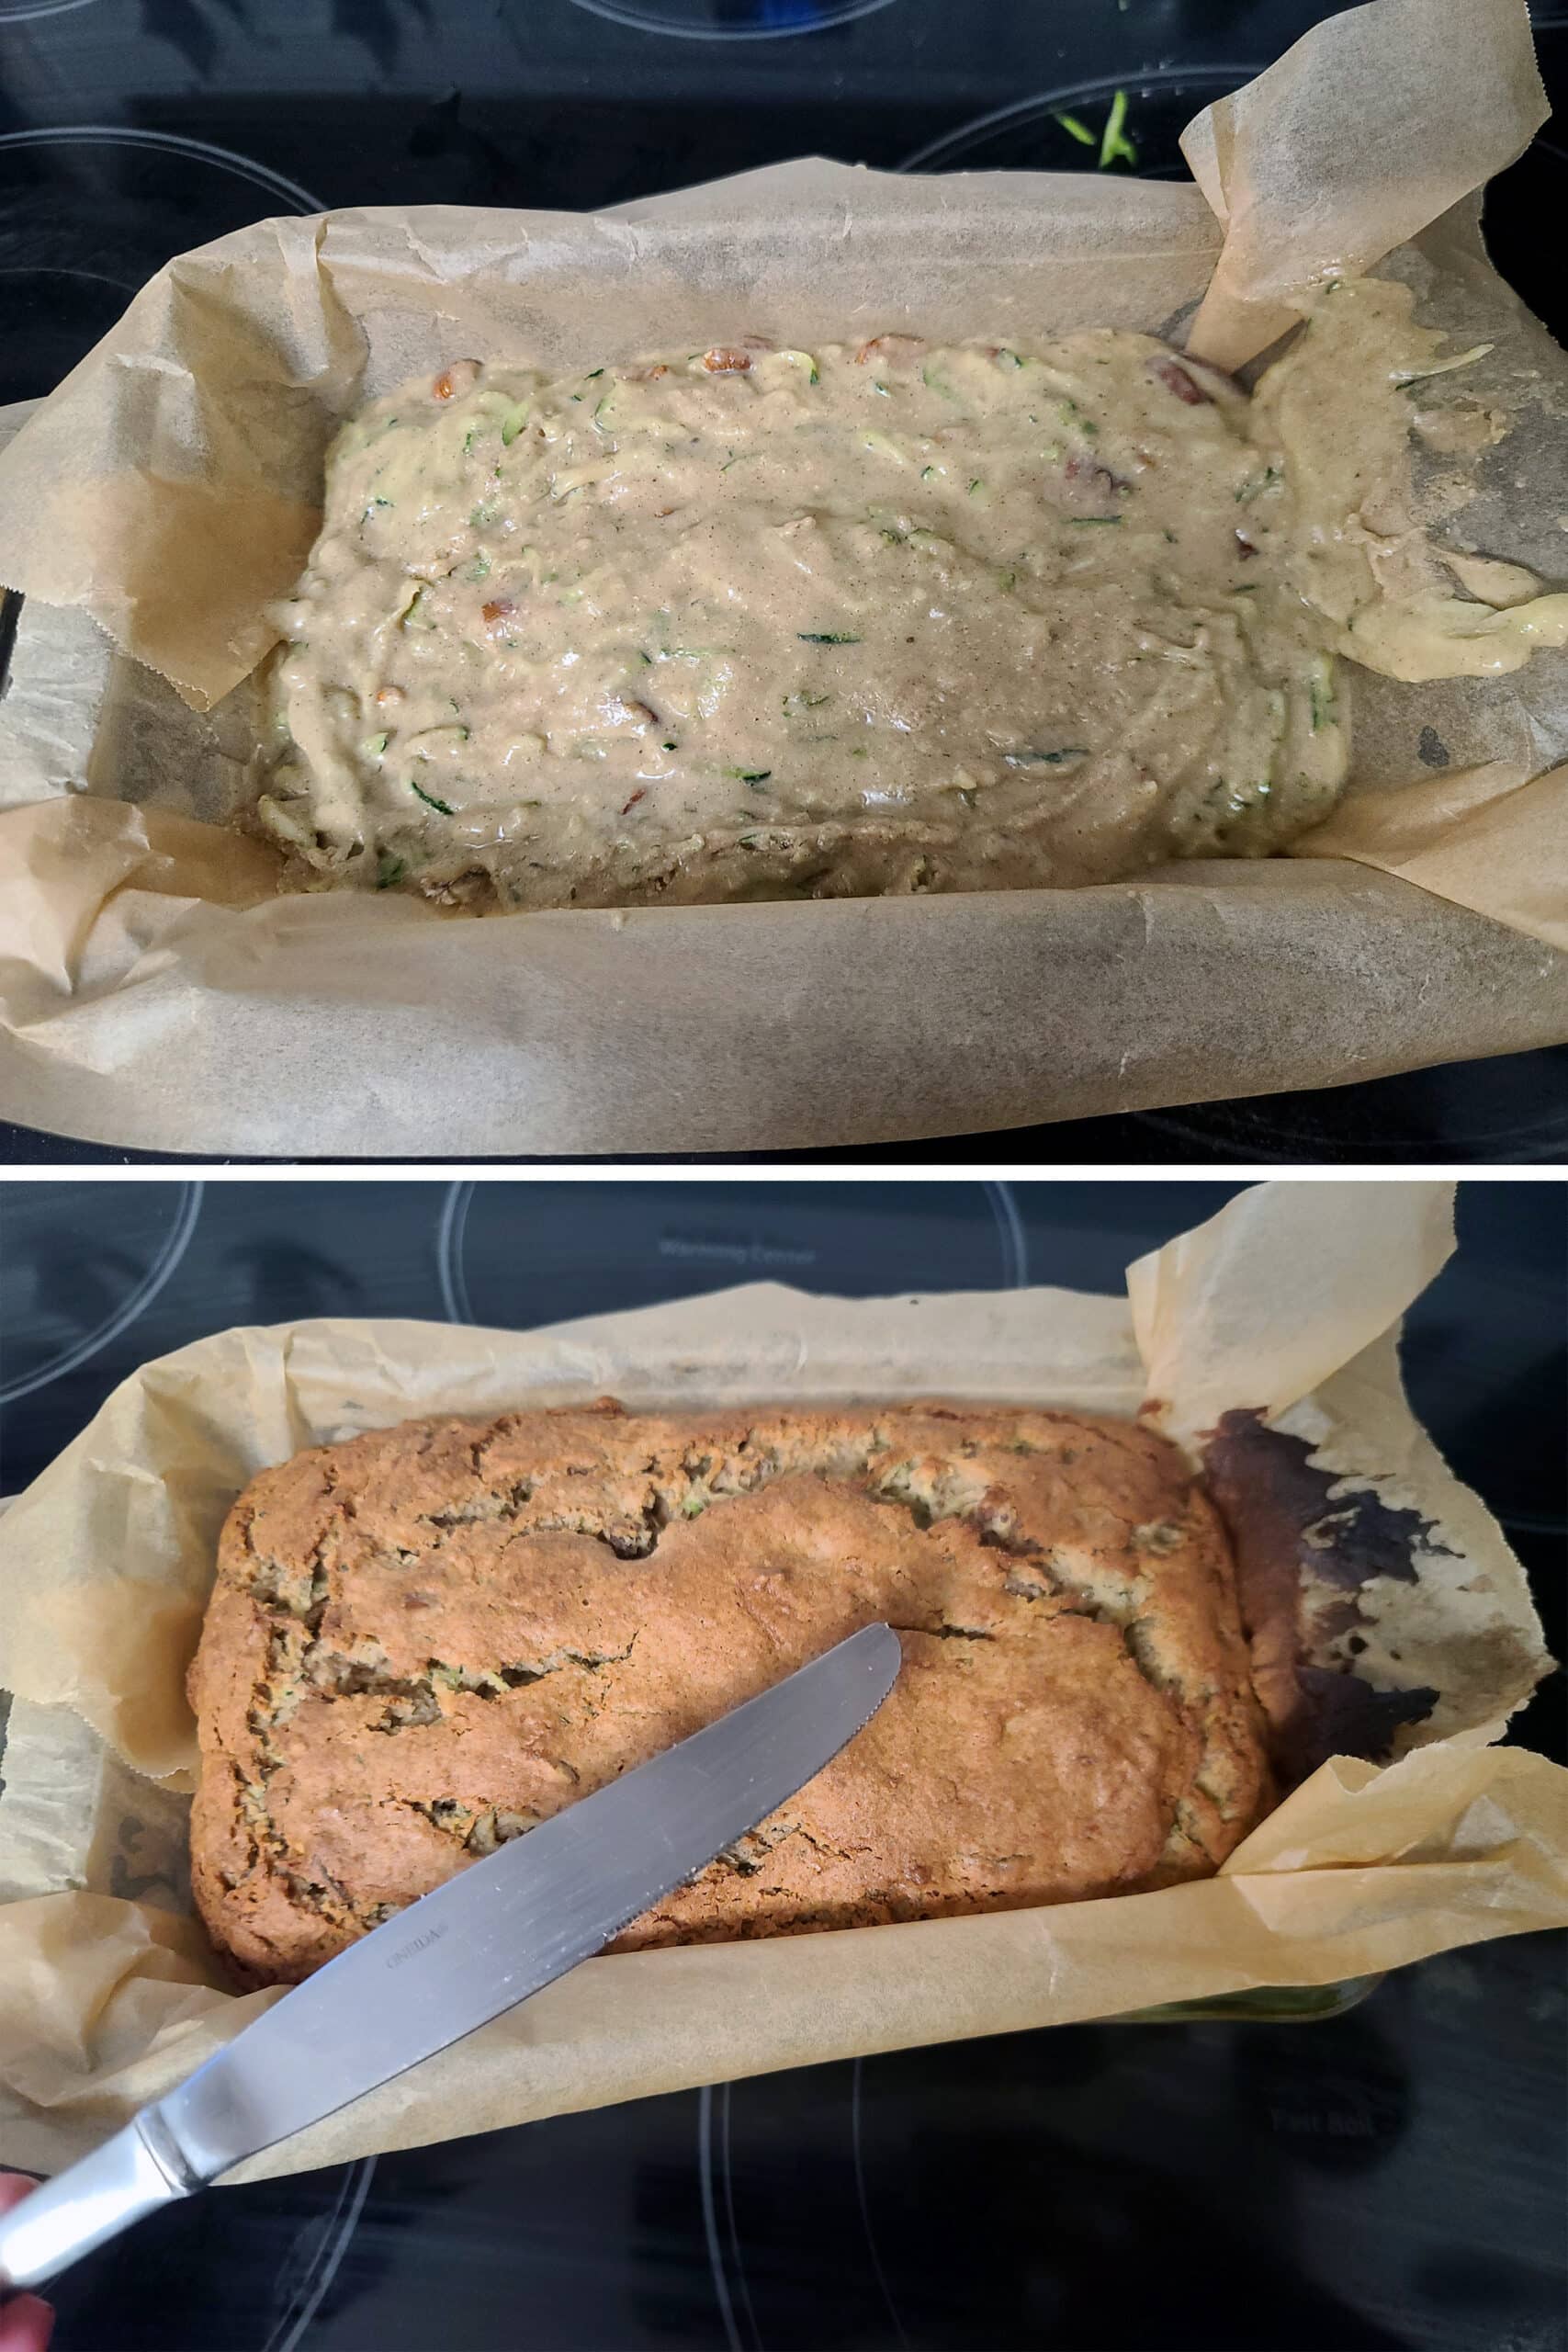 A 2 part image showing the gluten free zucchini loaf before and after baking.